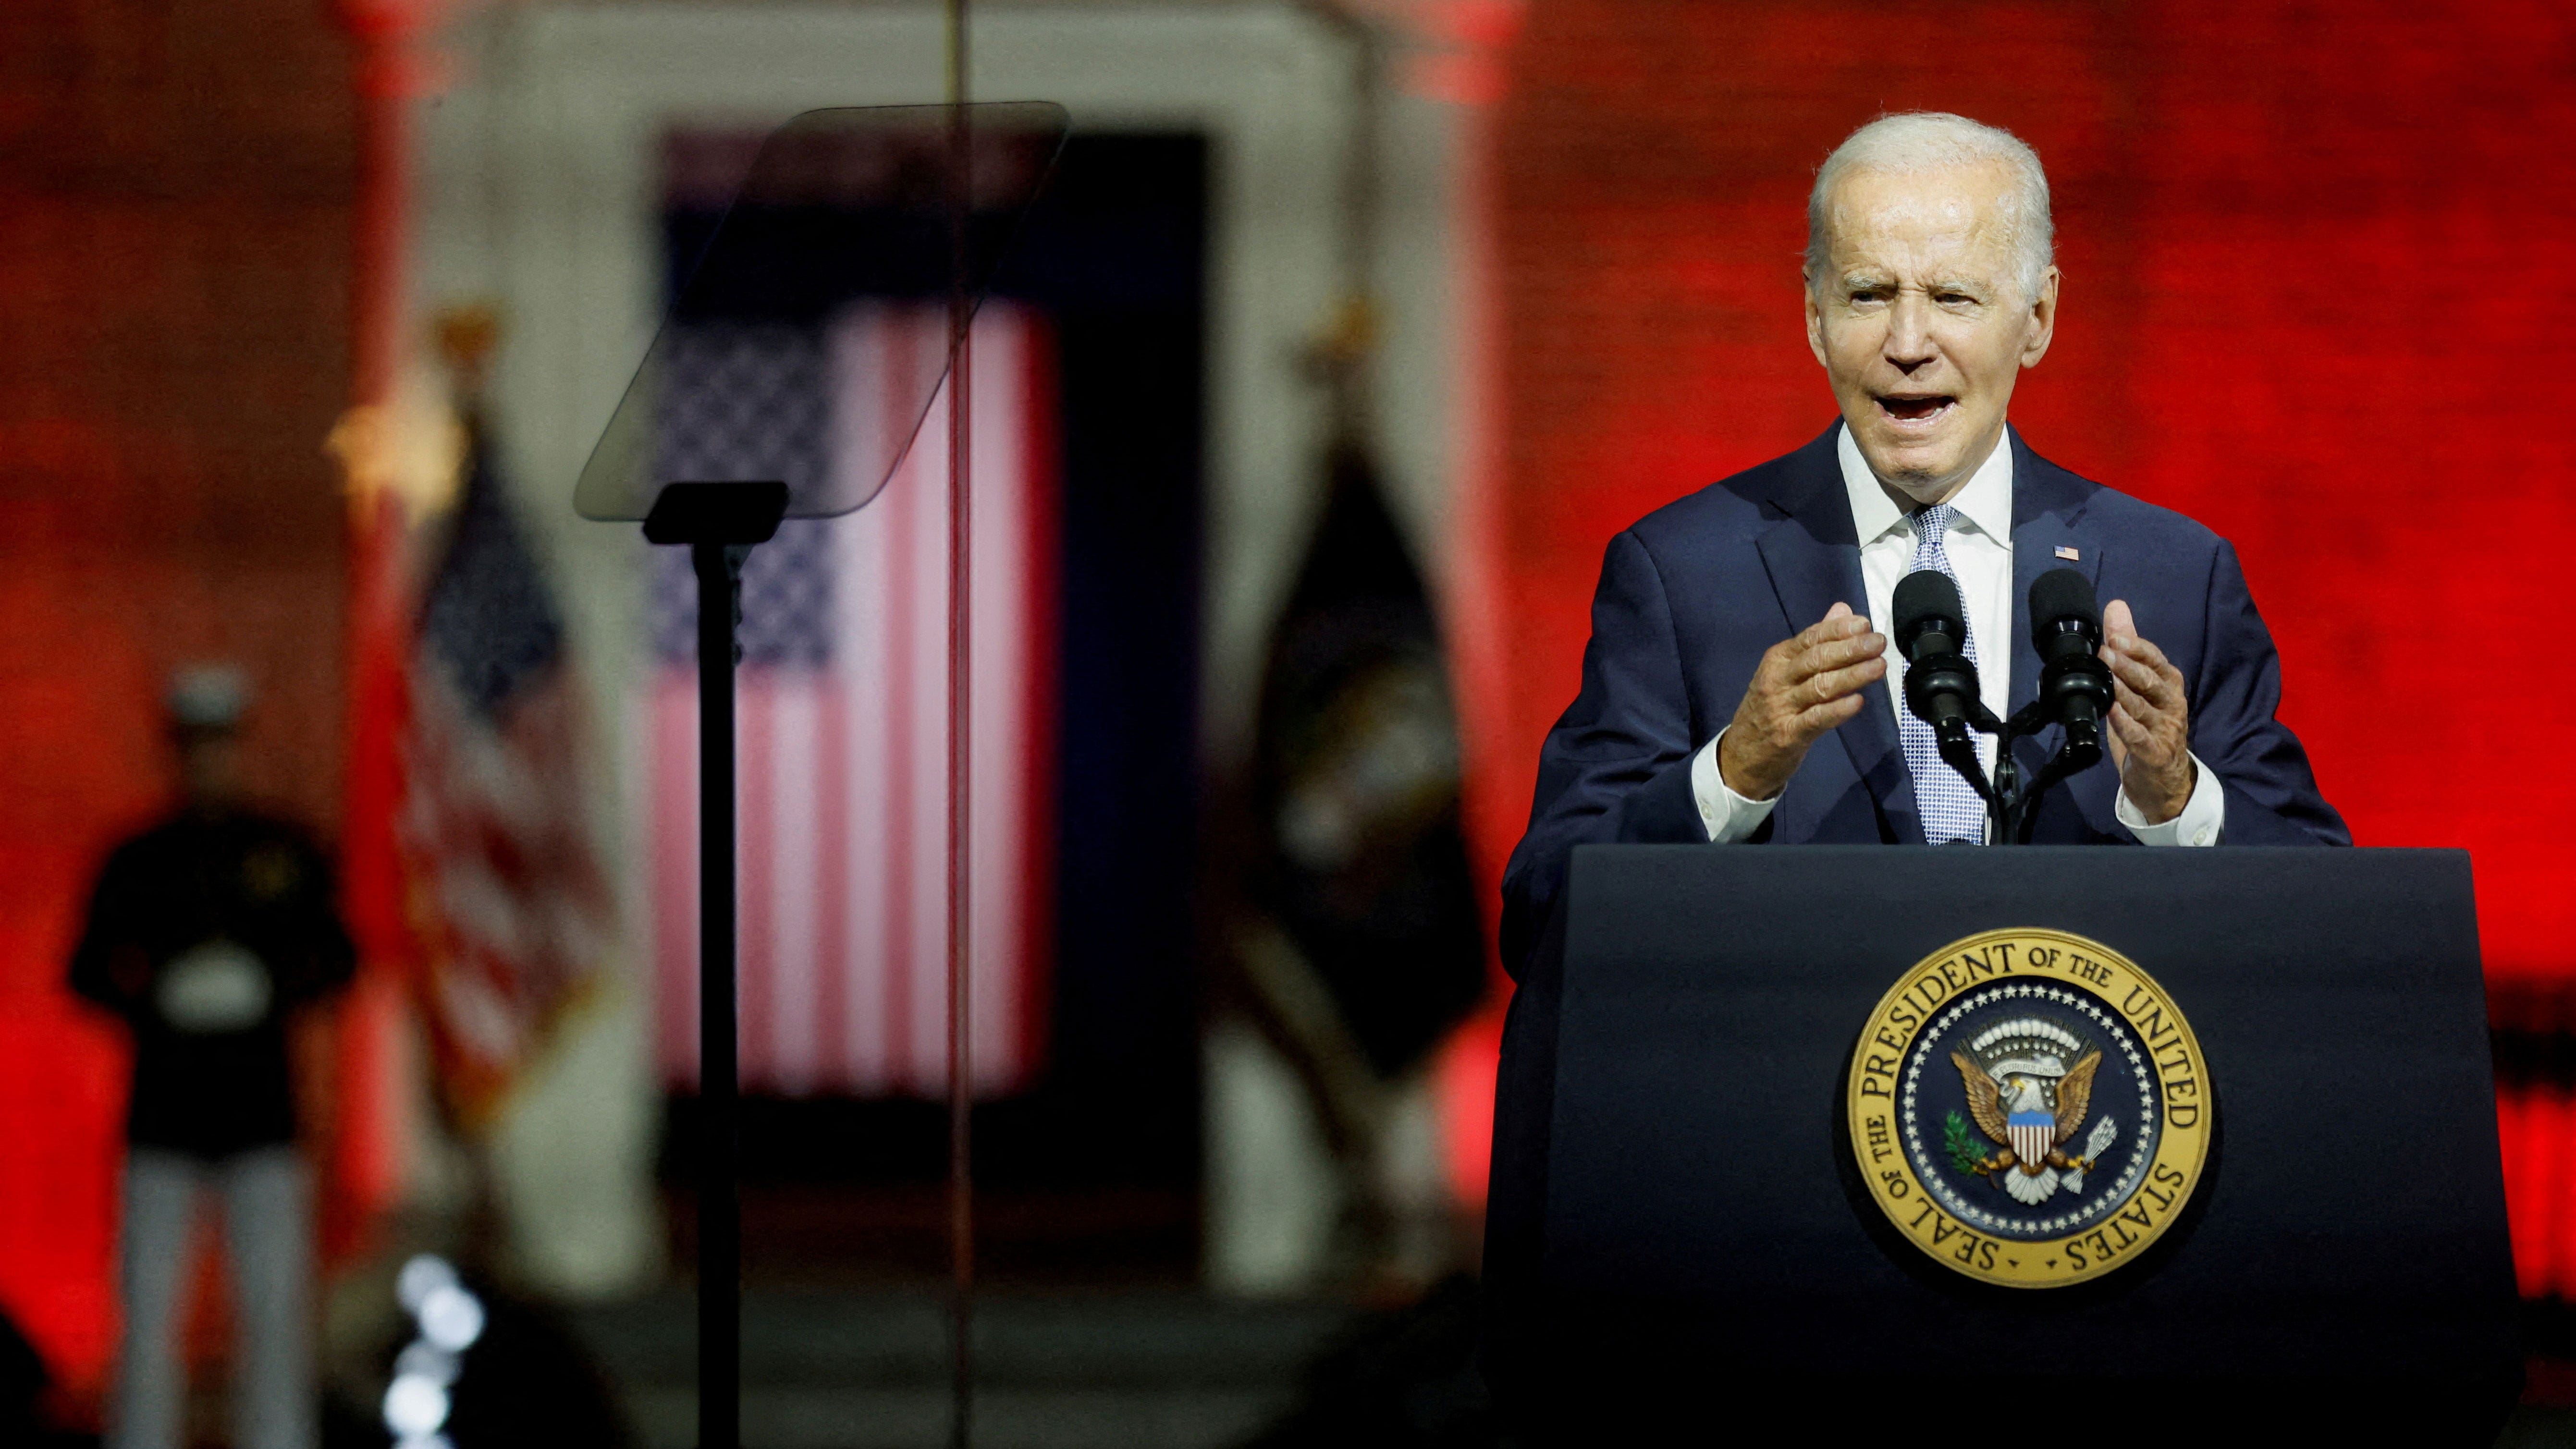 Political commentators media hosts give Biden’s campaign style speech mixed reviews: ‘Divisive by nature’ – Fox News